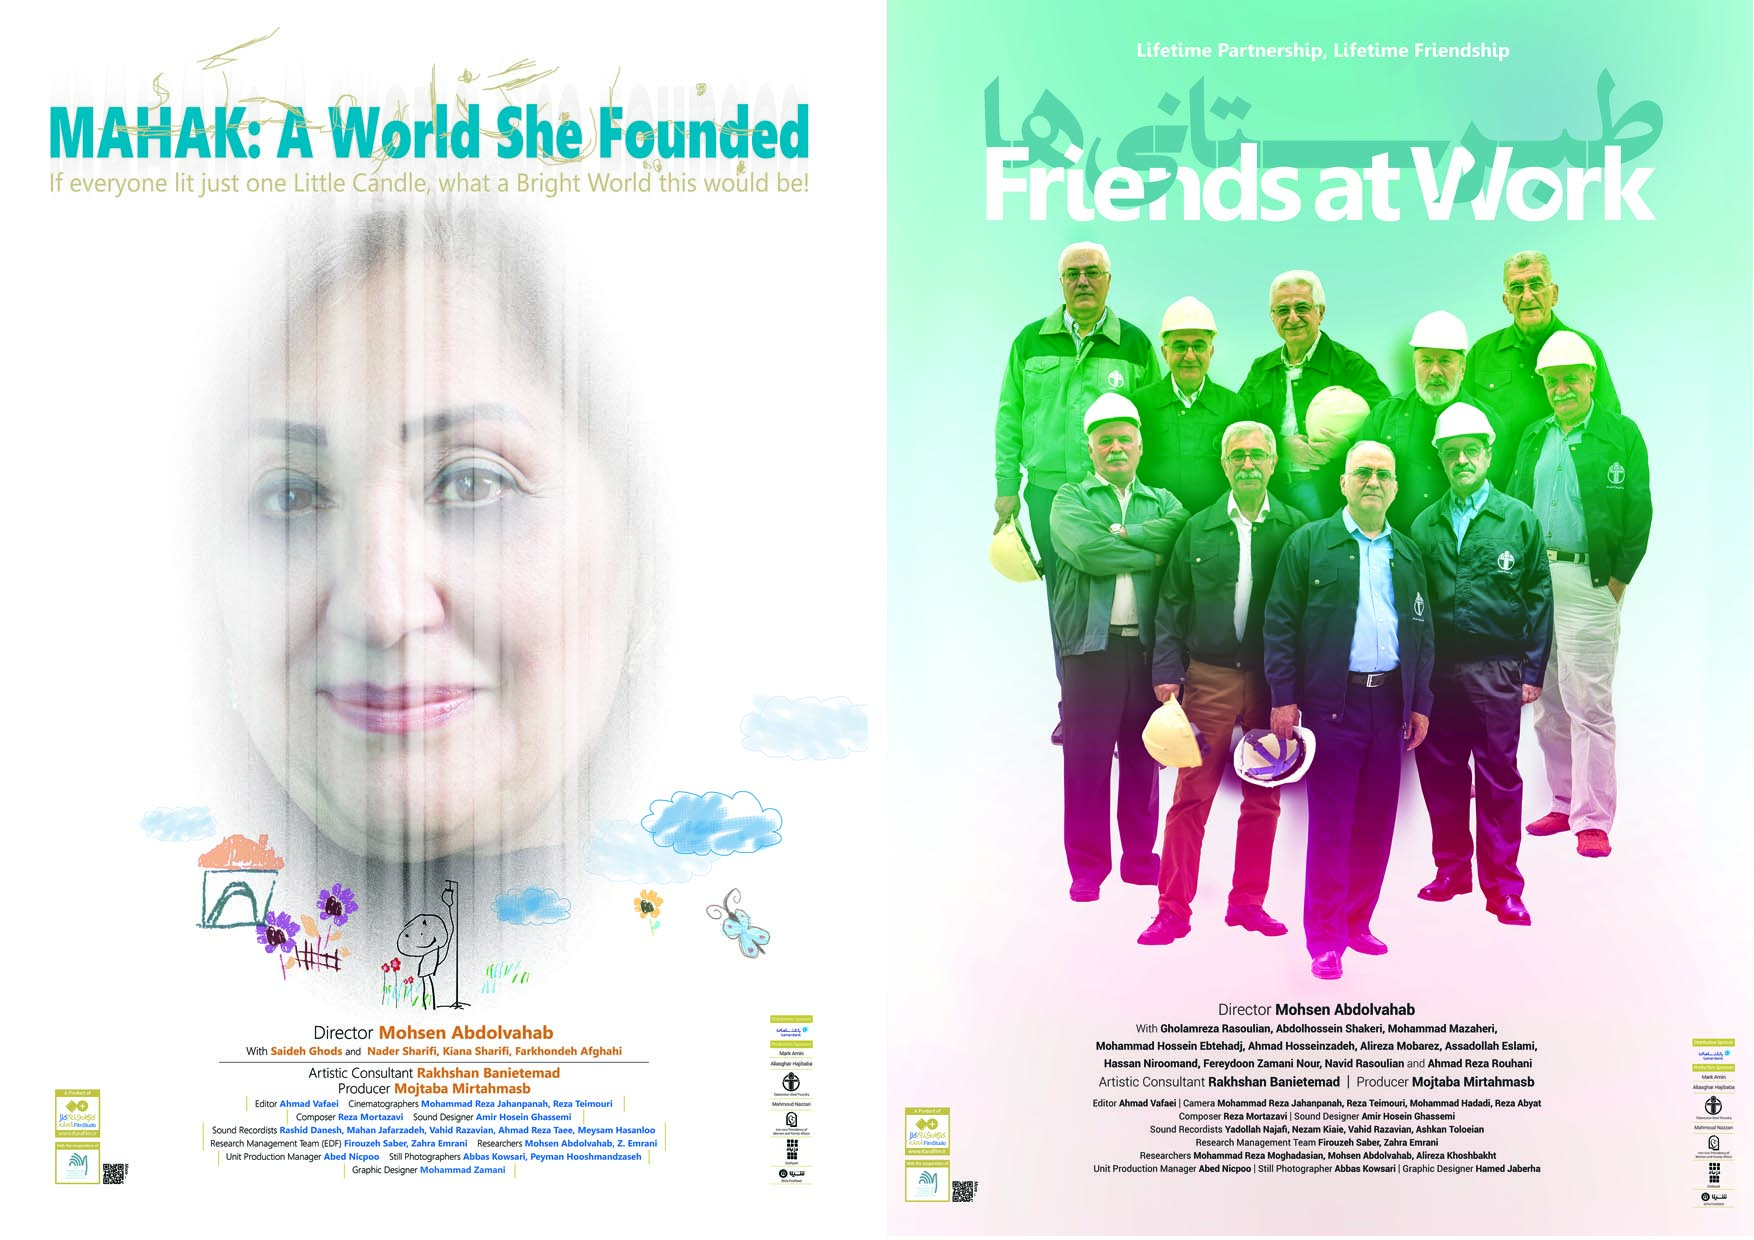 Two Documentaries by “Mohsen Abdolvahab” to be Screened